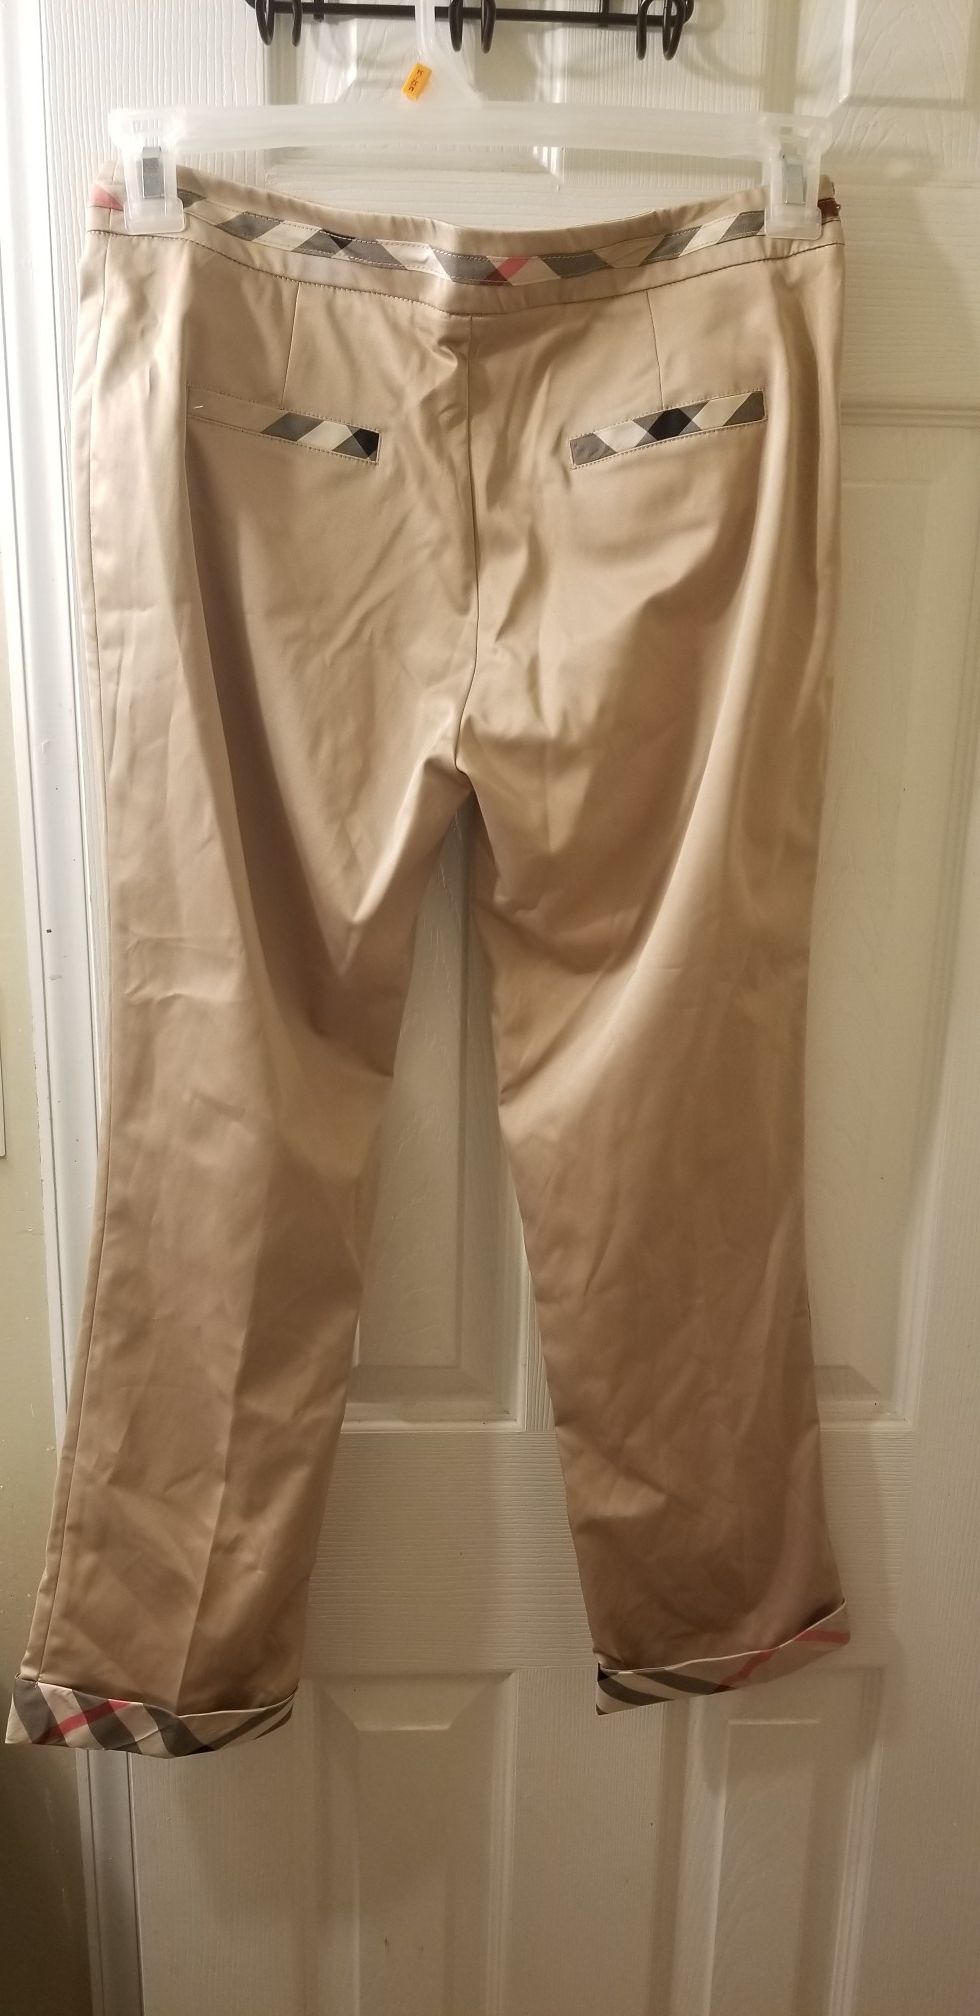 Designer pants, new with tag